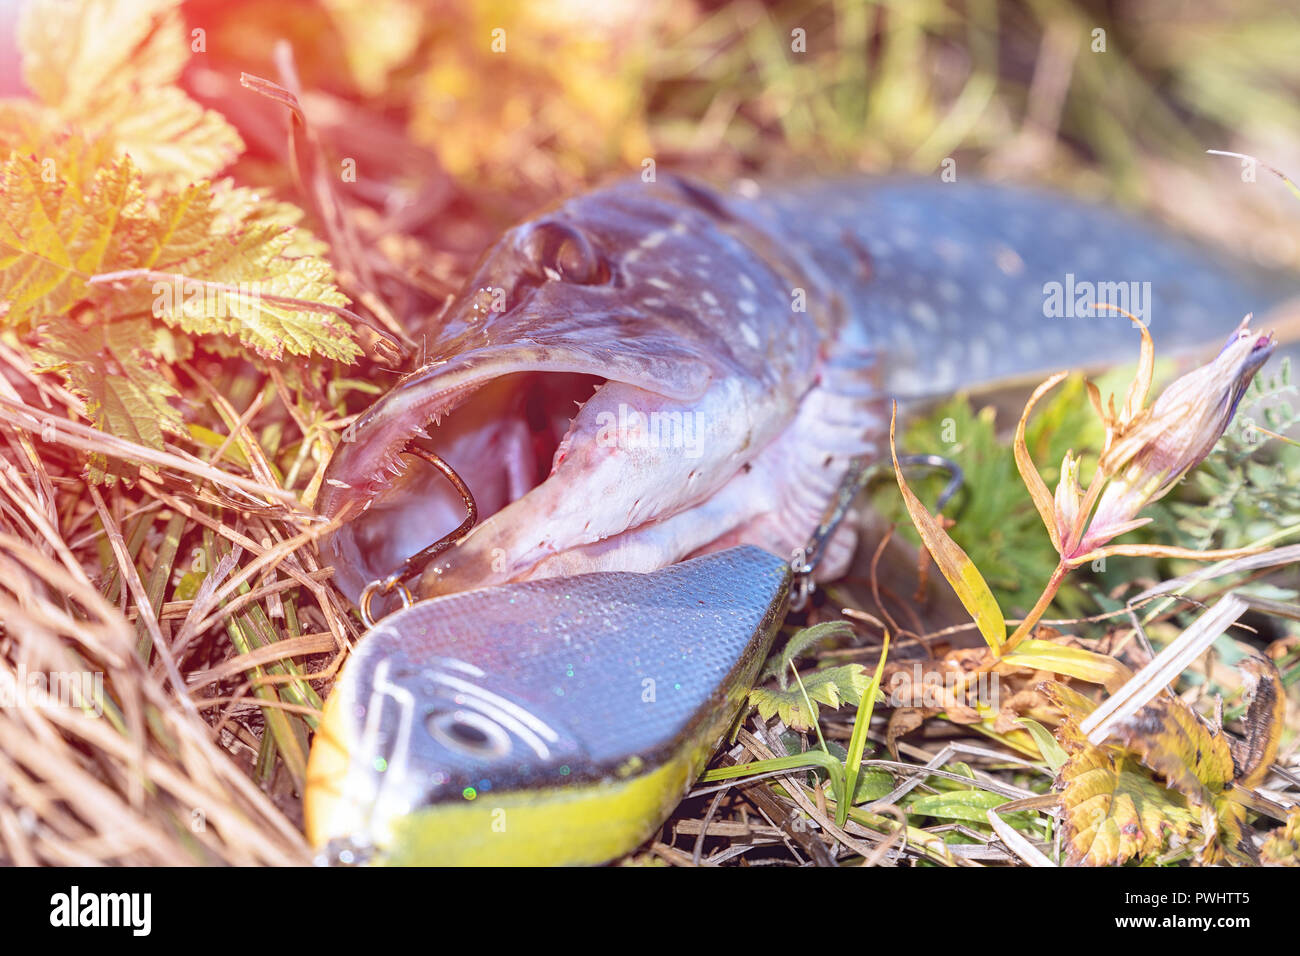 Pike on grass with bait in mouth Stock Photo